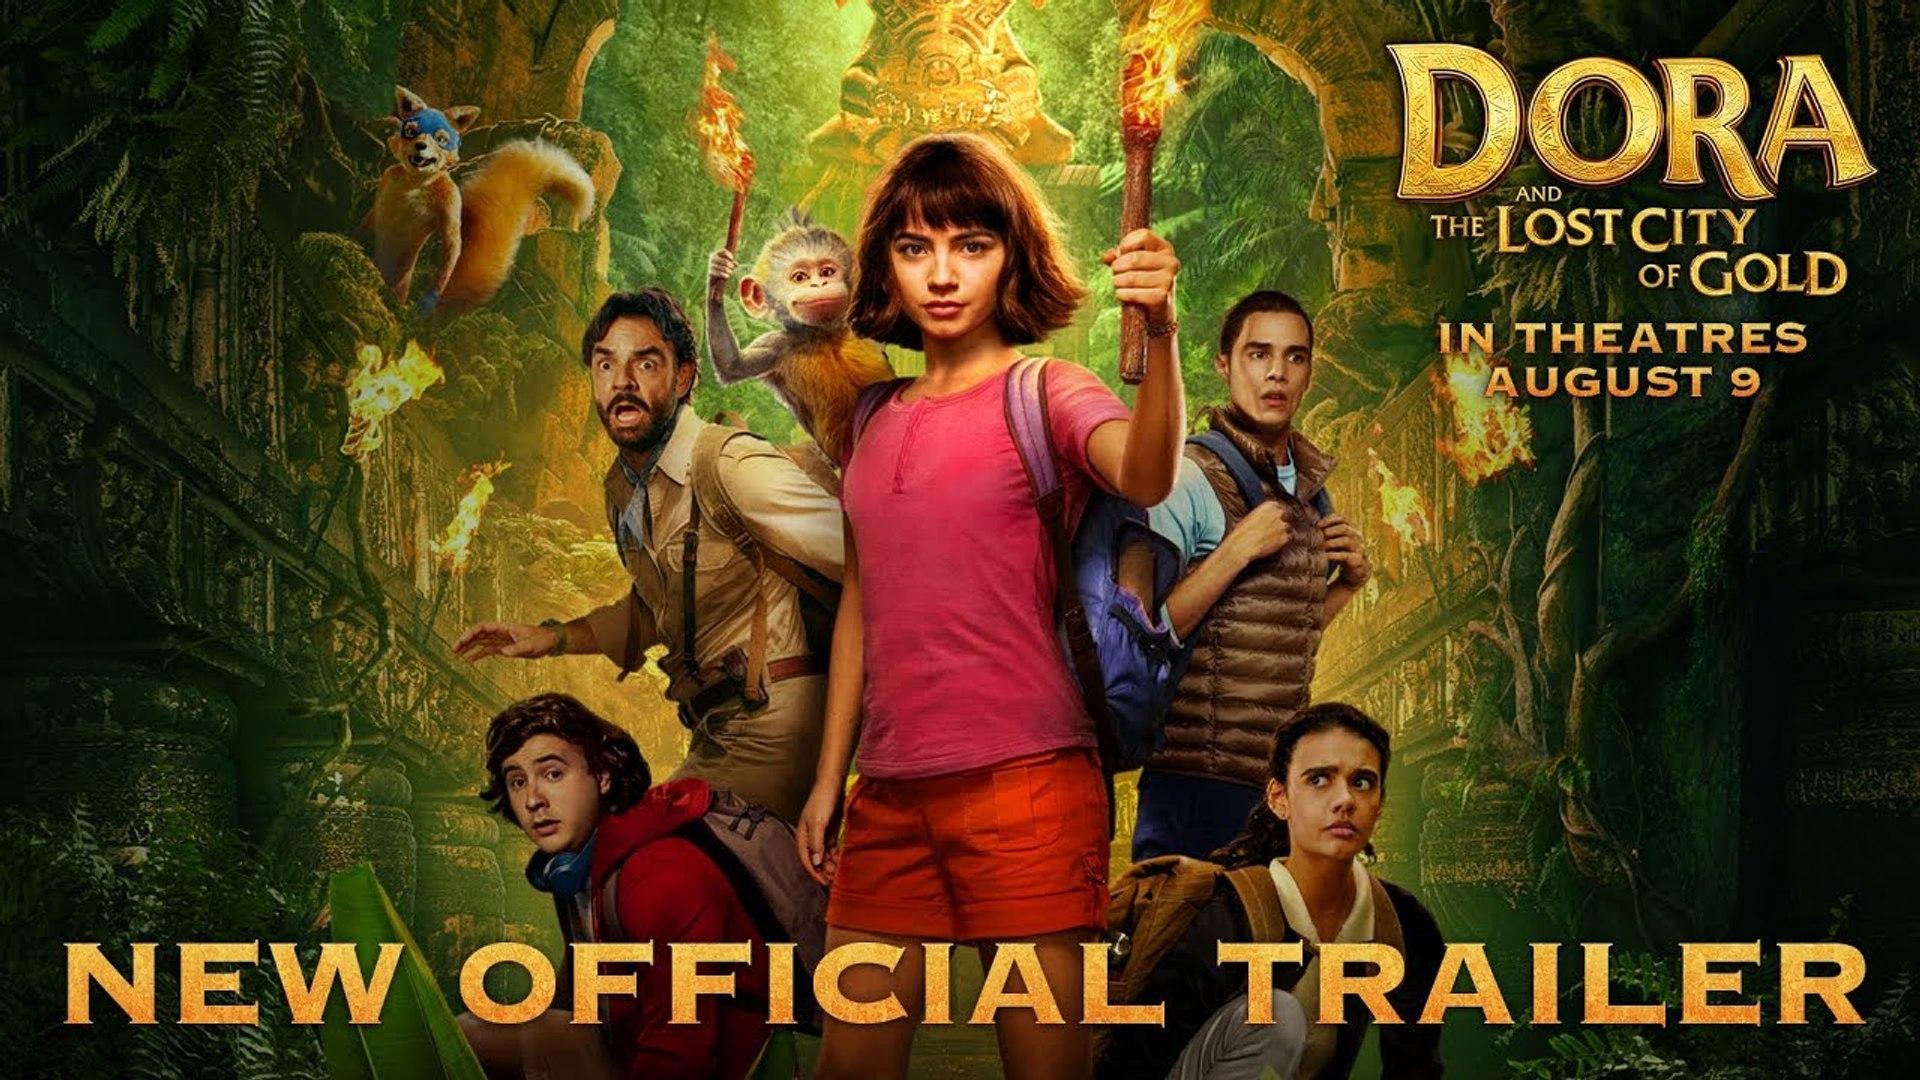 Dora and the Lost City of Gold 2 (2019)